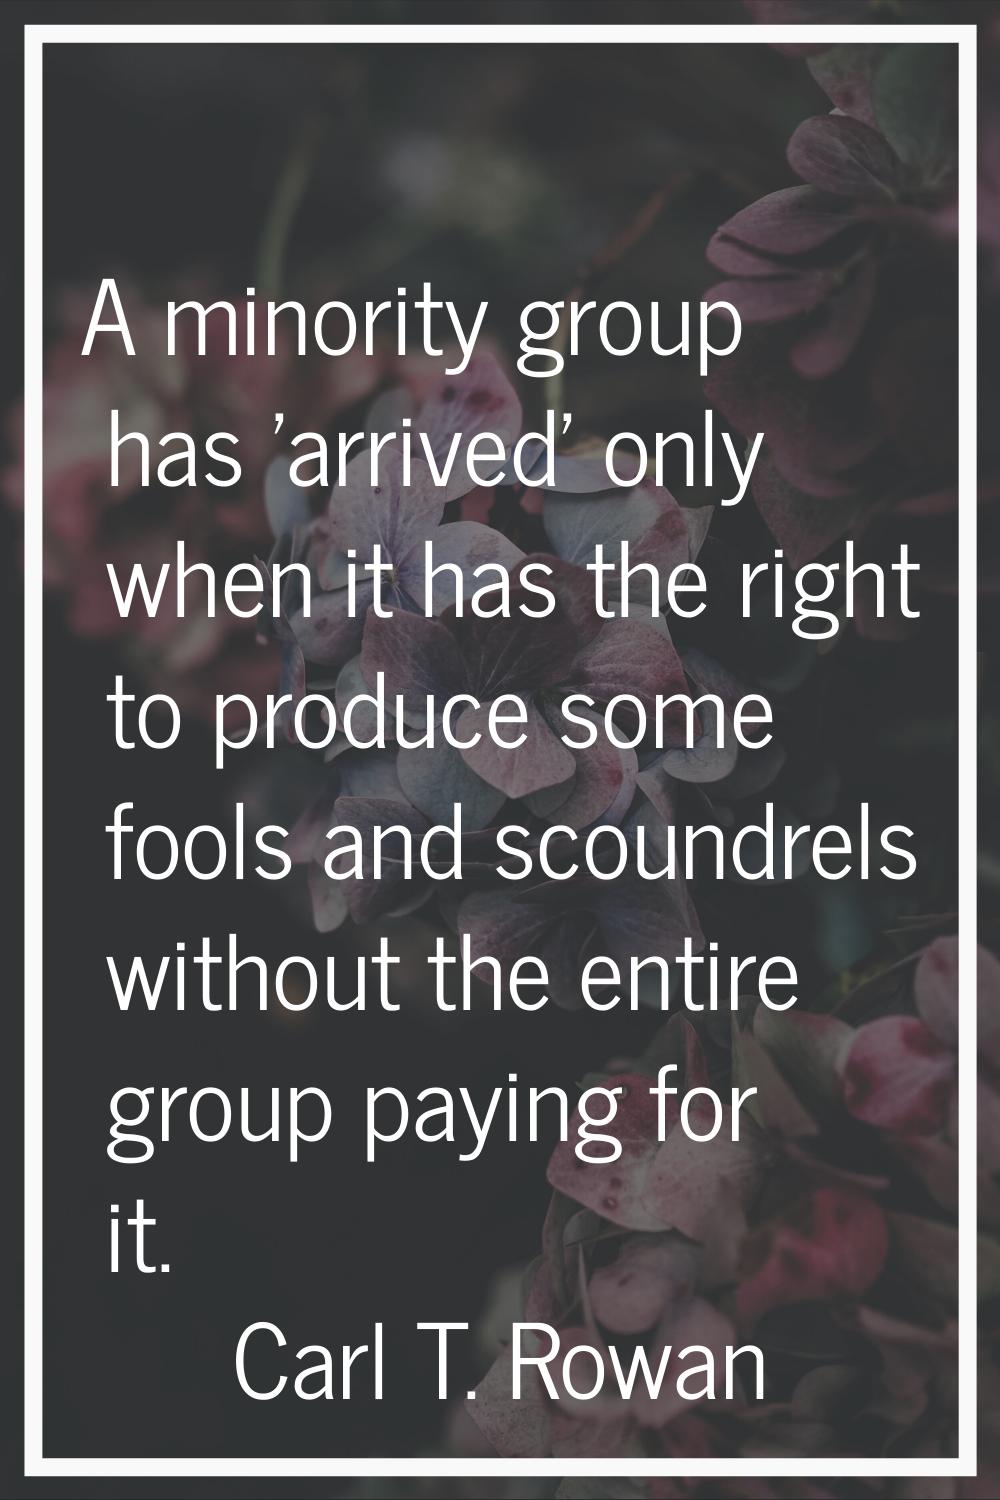 A minority group has 'arrived' only when it has the right to produce some fools and scoundrels with